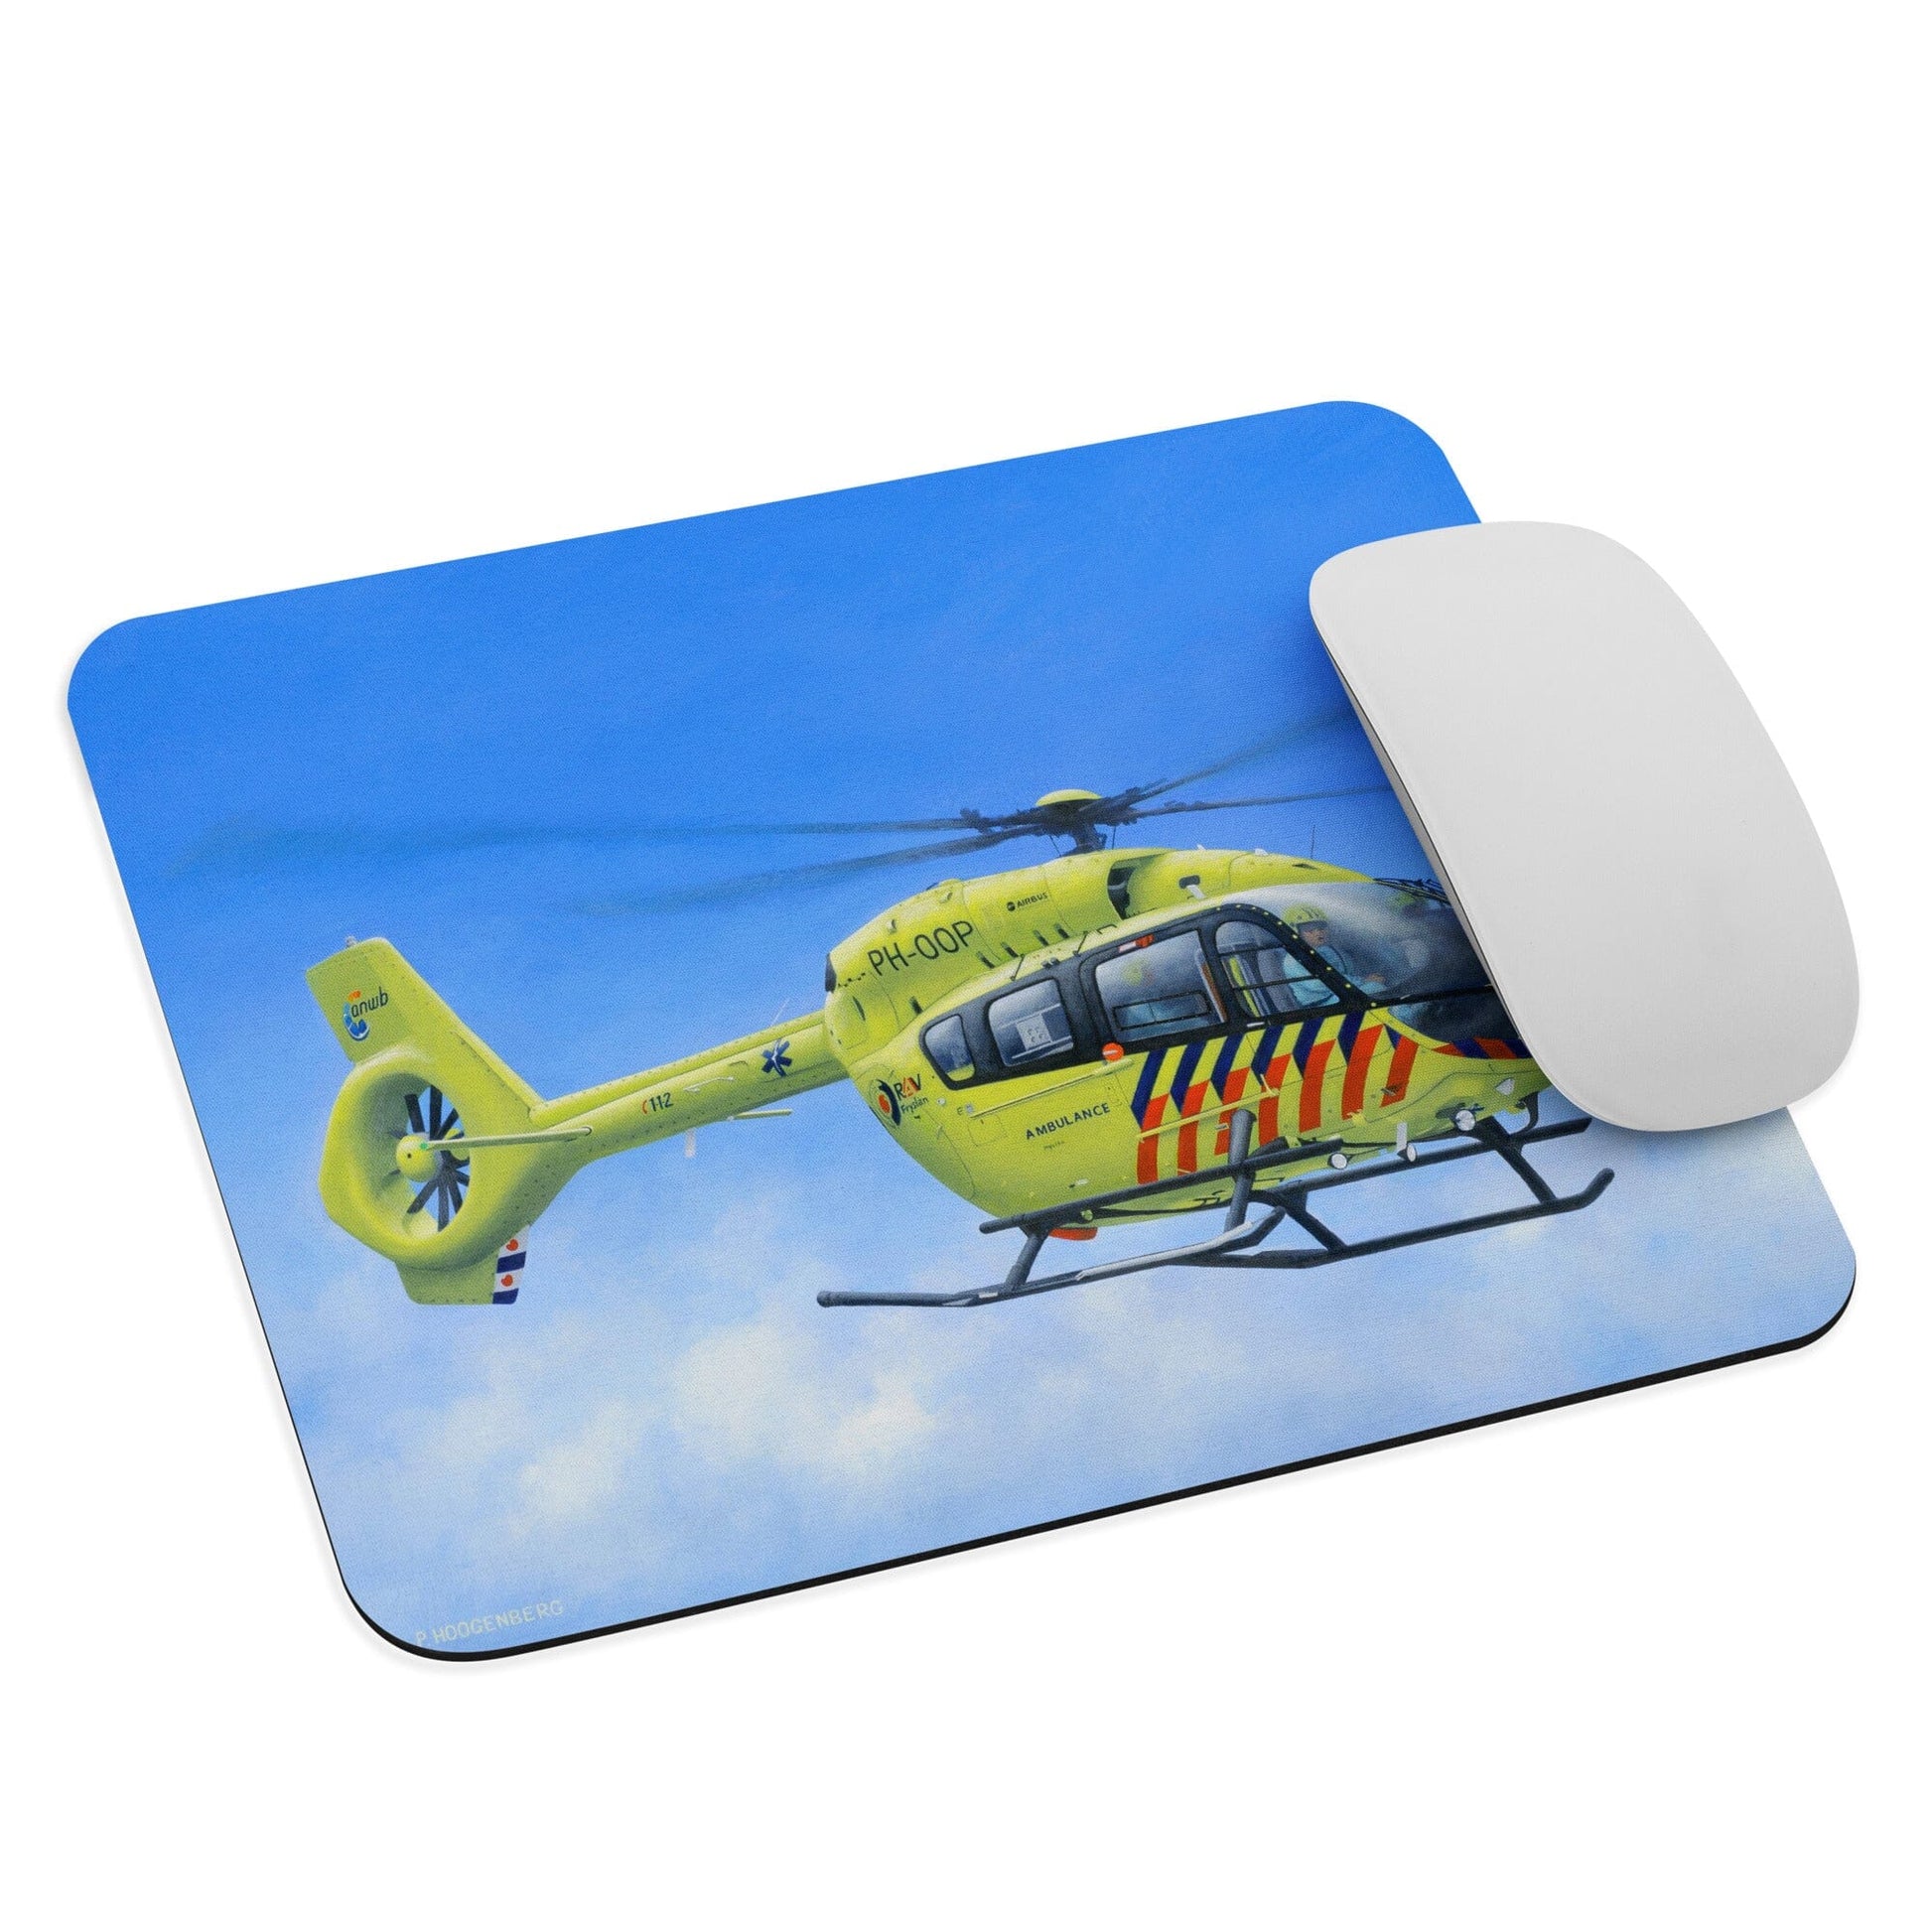 Peter Hoogenberg - Mouse Pad - ANWB Helicopter Wadden Islands Mouse Pads TP Aviation Art 